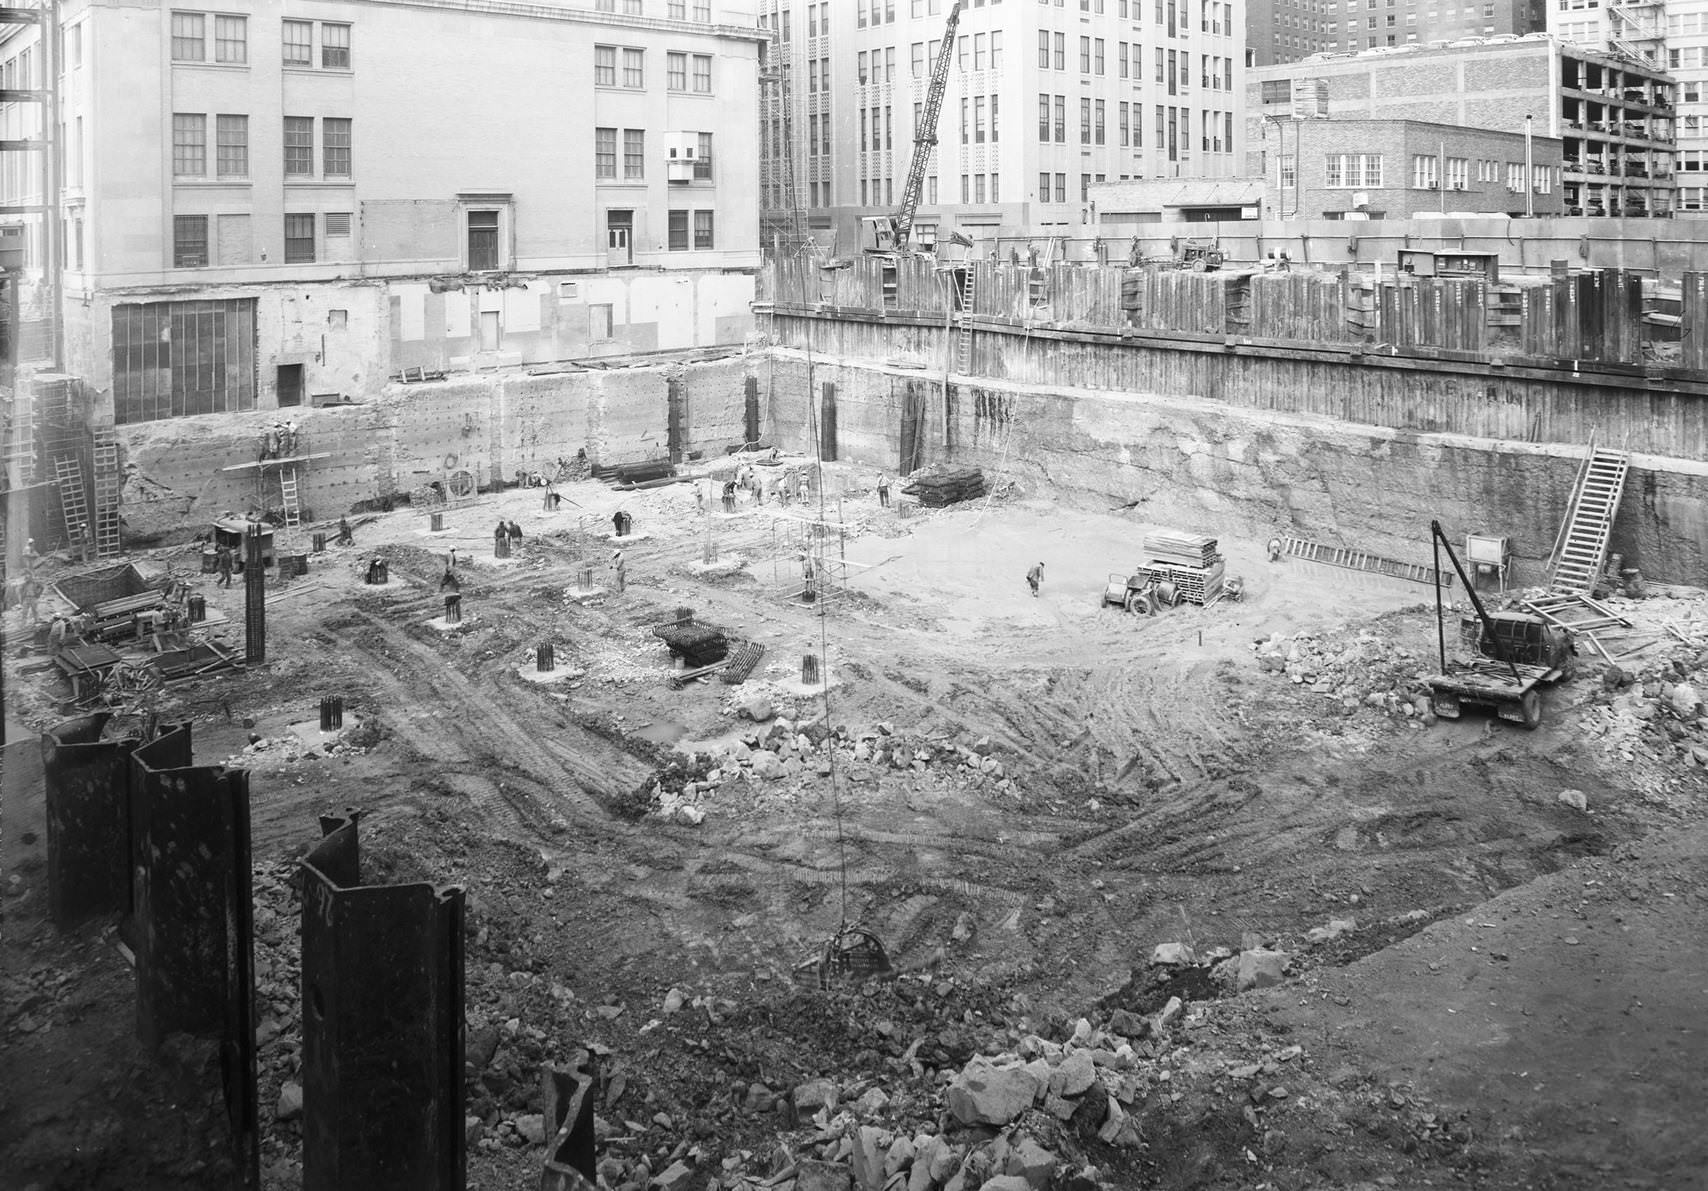 Federal Reserve Bank of Dallas, addition construction, downtown Dallas, Texas, 1959